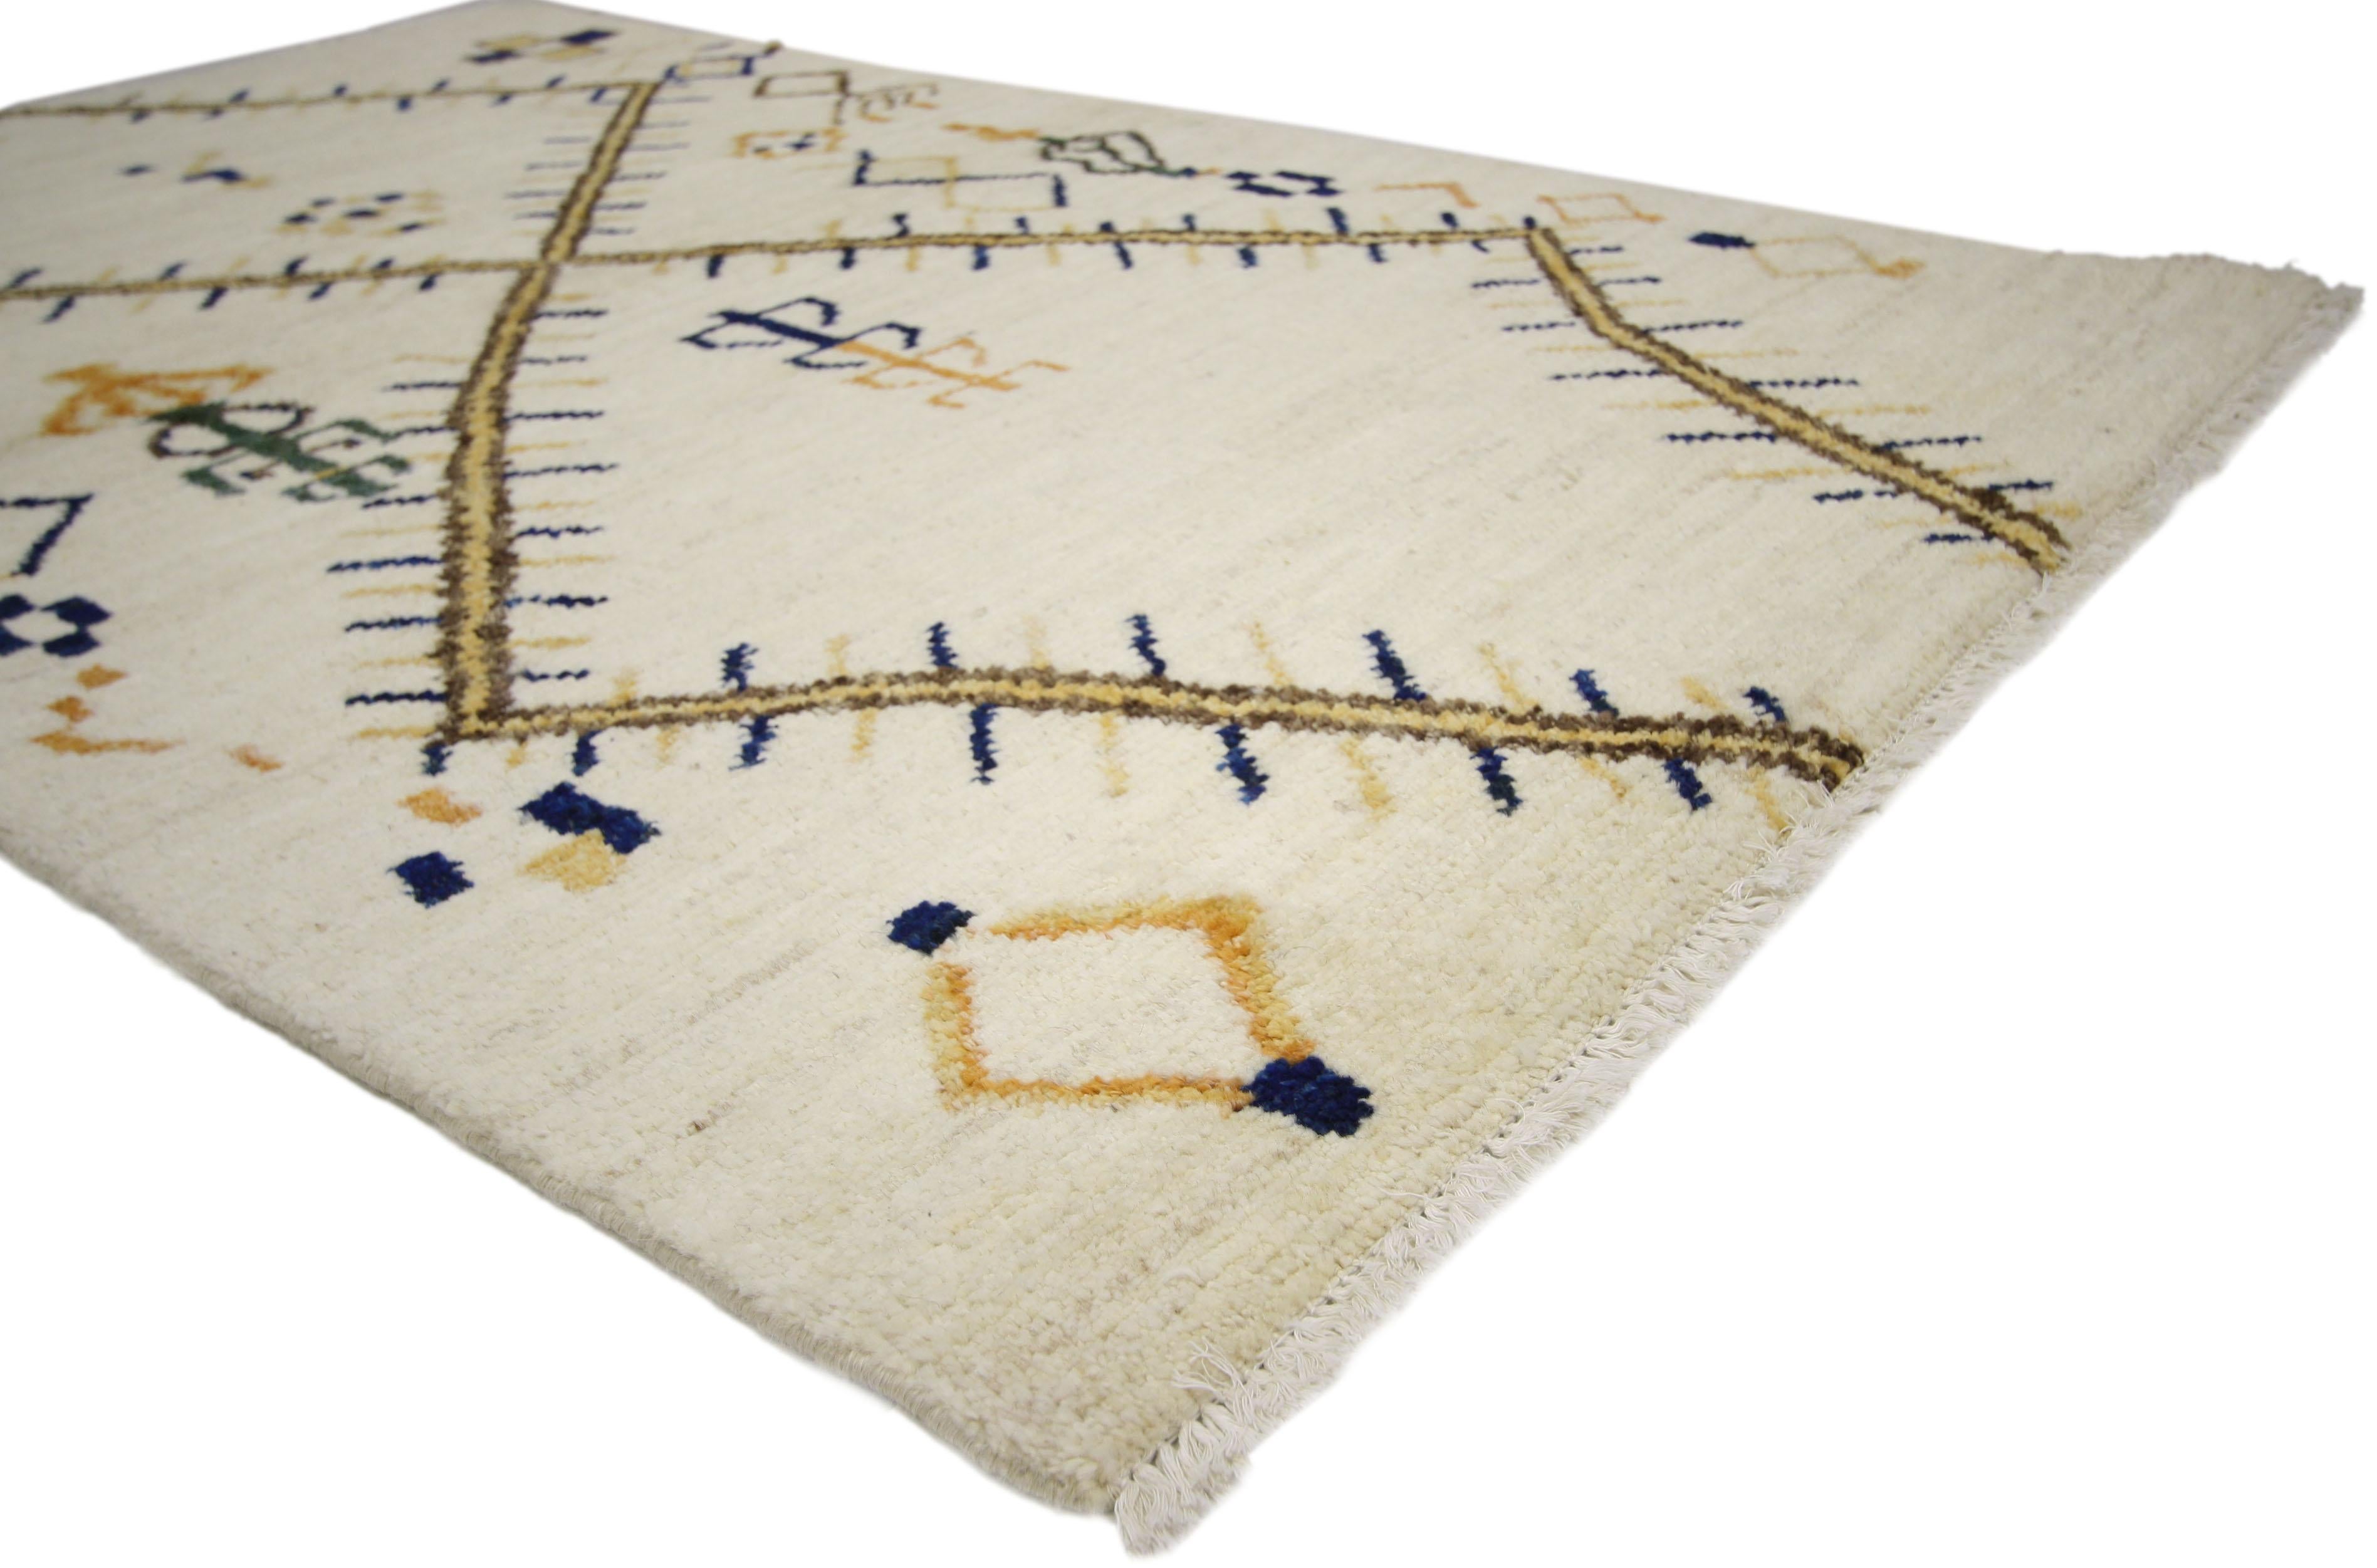 80299 Contemporary Moroccan Style Rug with Tribal Design. This Moroccan style rug harmonizes disparate elements, brings modern tribal style while adding texture and depth to your space. This is a fantastic example of a contemporary Moroccan style